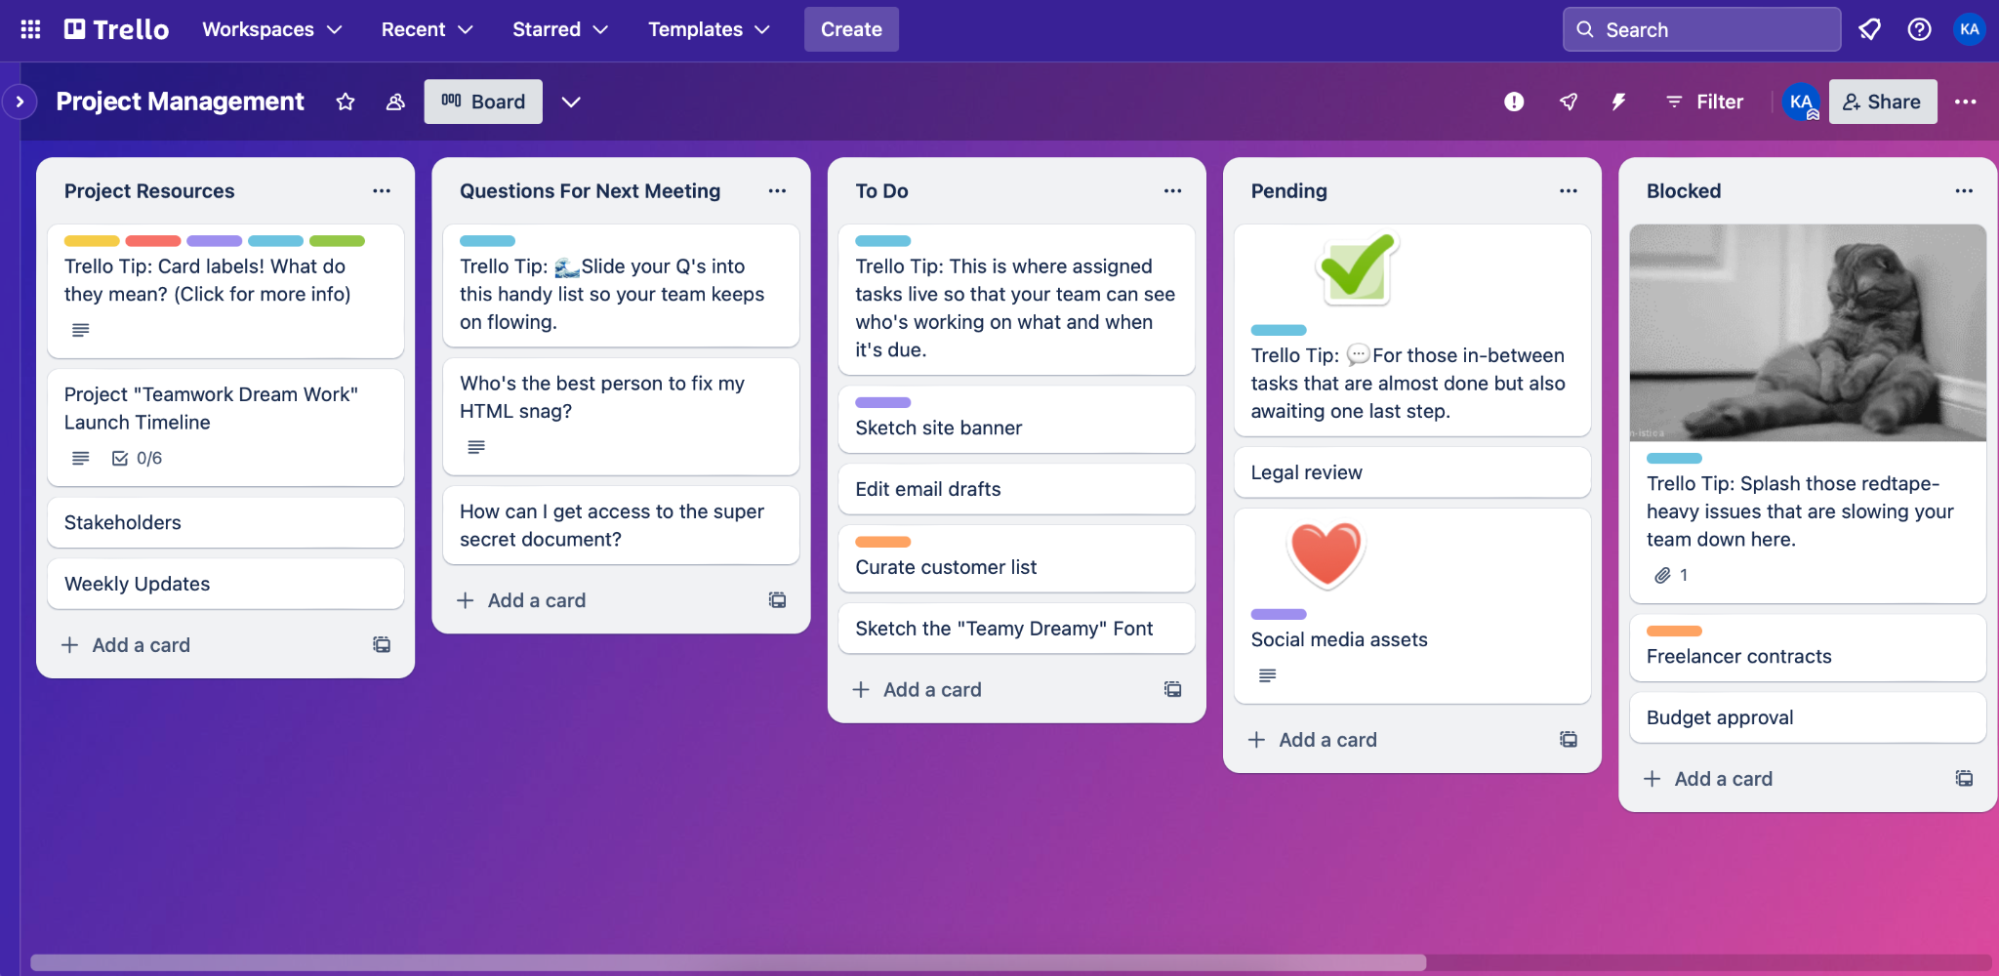 How To Use Trello For Project Management: Expert Tips & Tricks